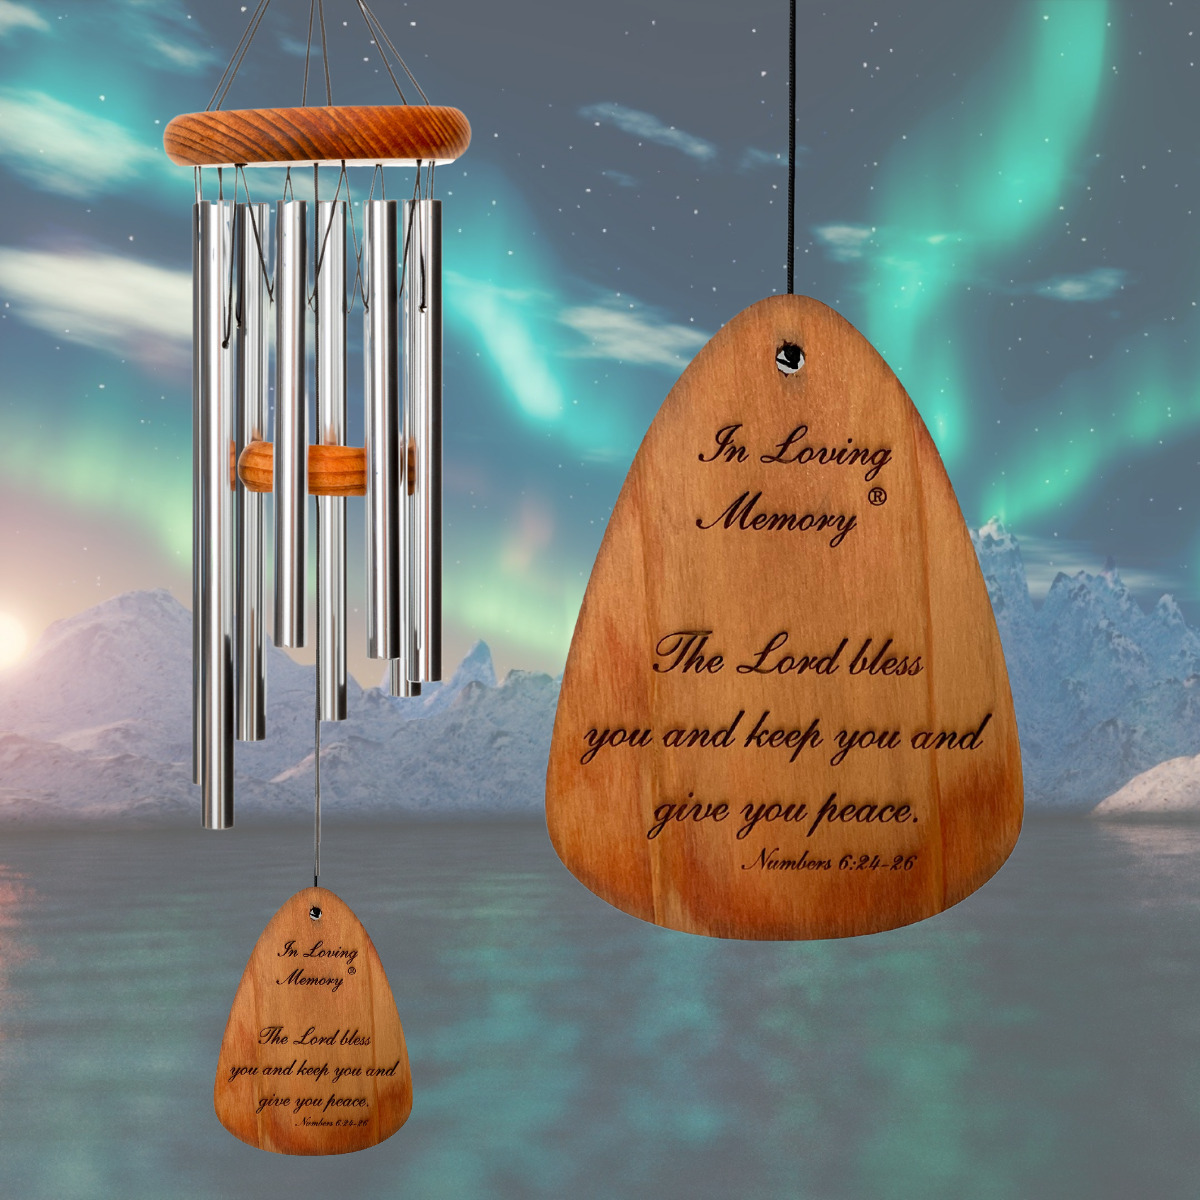 In Loving Memory 24 Inch Windchime - The Lord bless you.. in Silver